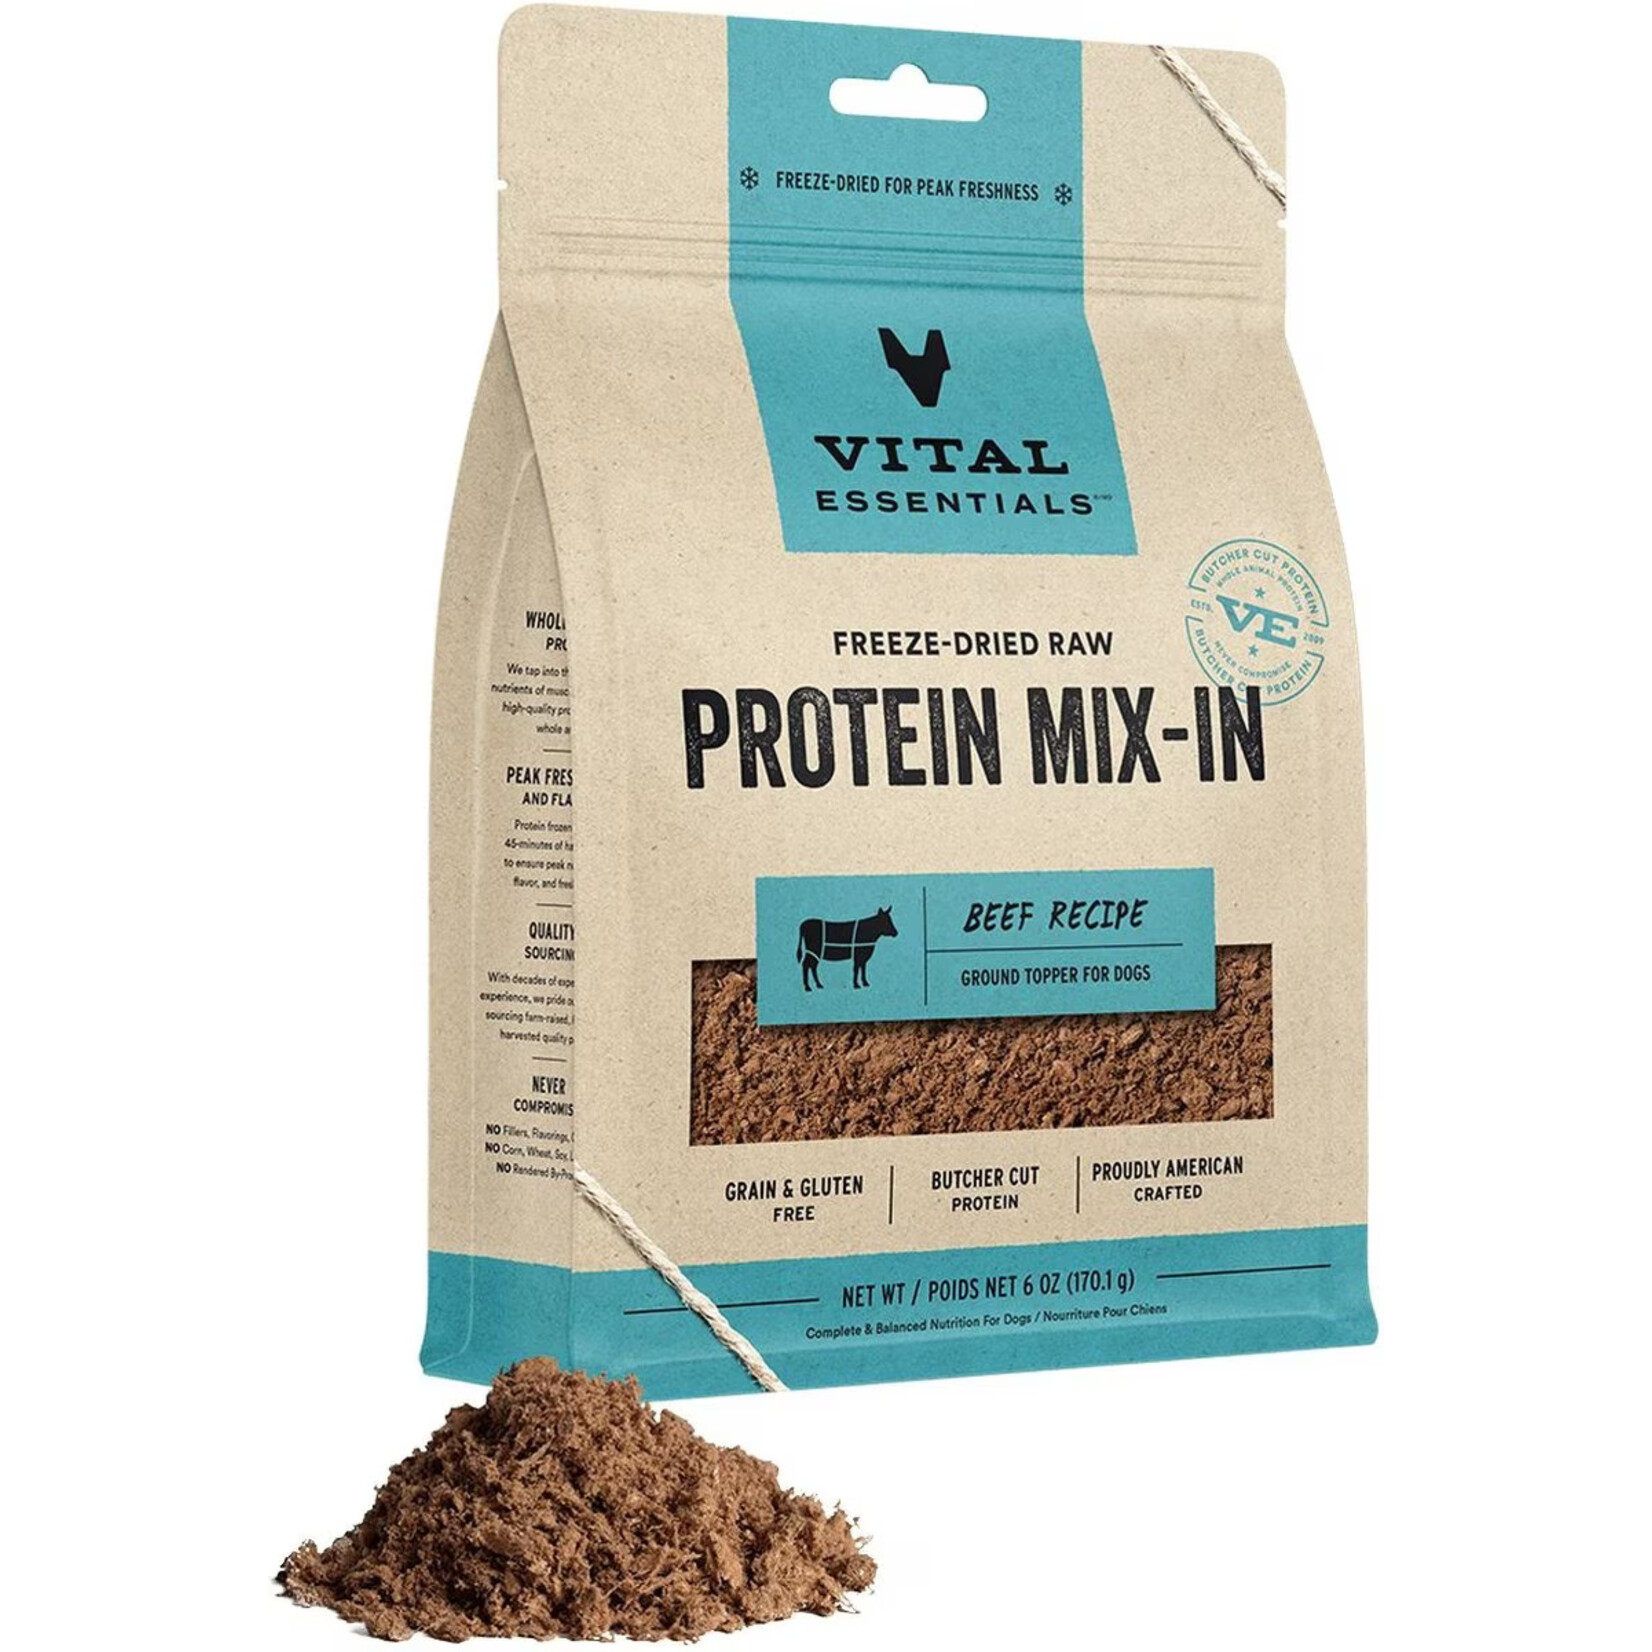 Vital Essentials Vital Essentials Freeze-Dried Raw Protein Mix-In - Beef Recipe Ground Topper for Dogs